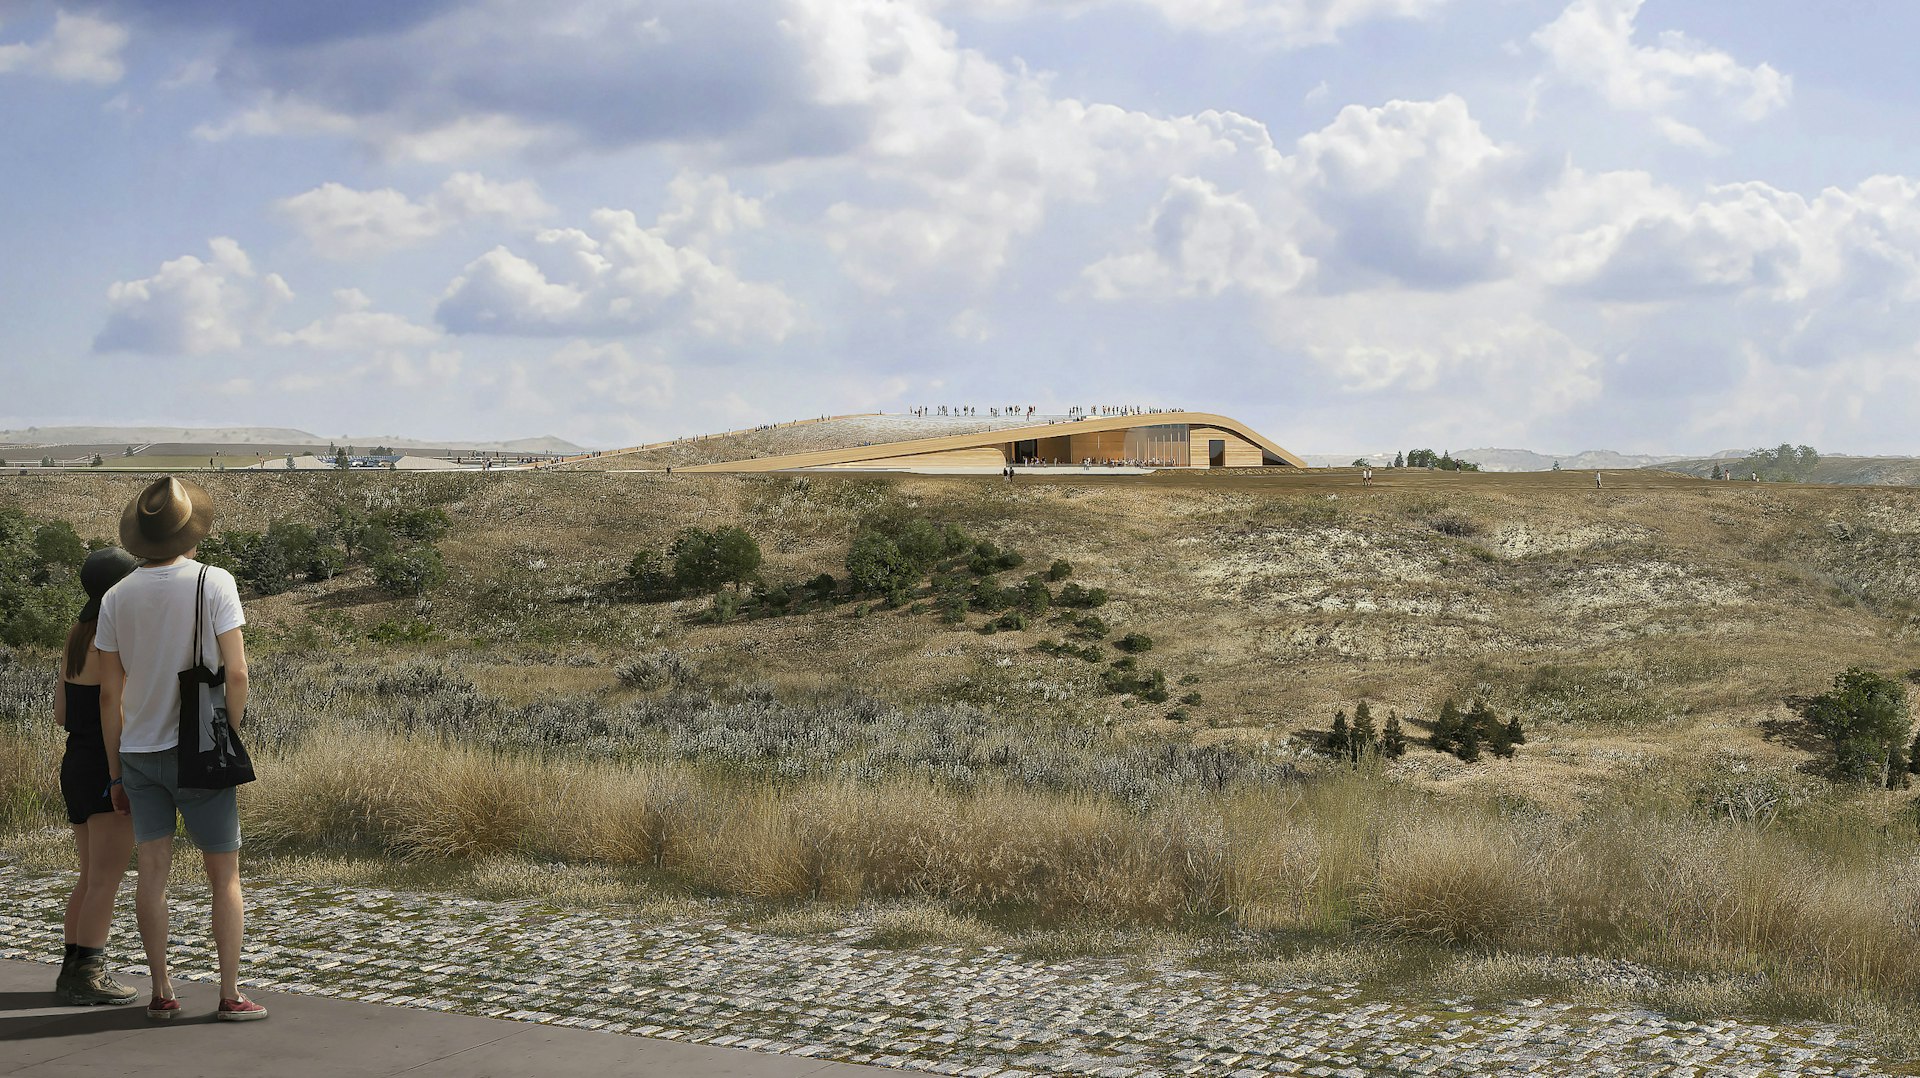 A rendering of Theodore Roosevelt Library in the North Dakota Badlands